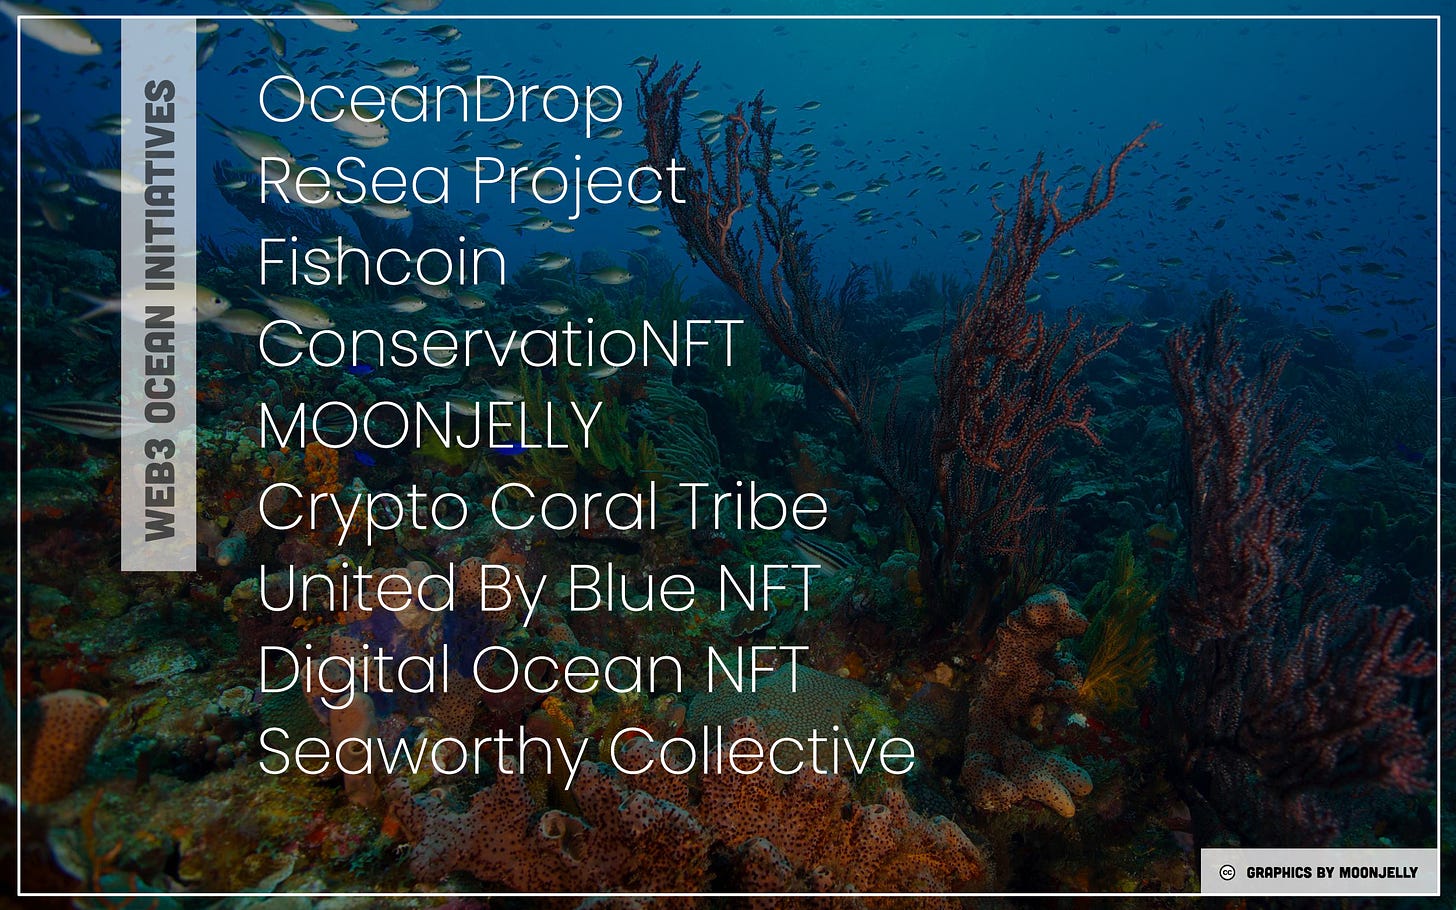 Web3 initiatives for ocean conservation.